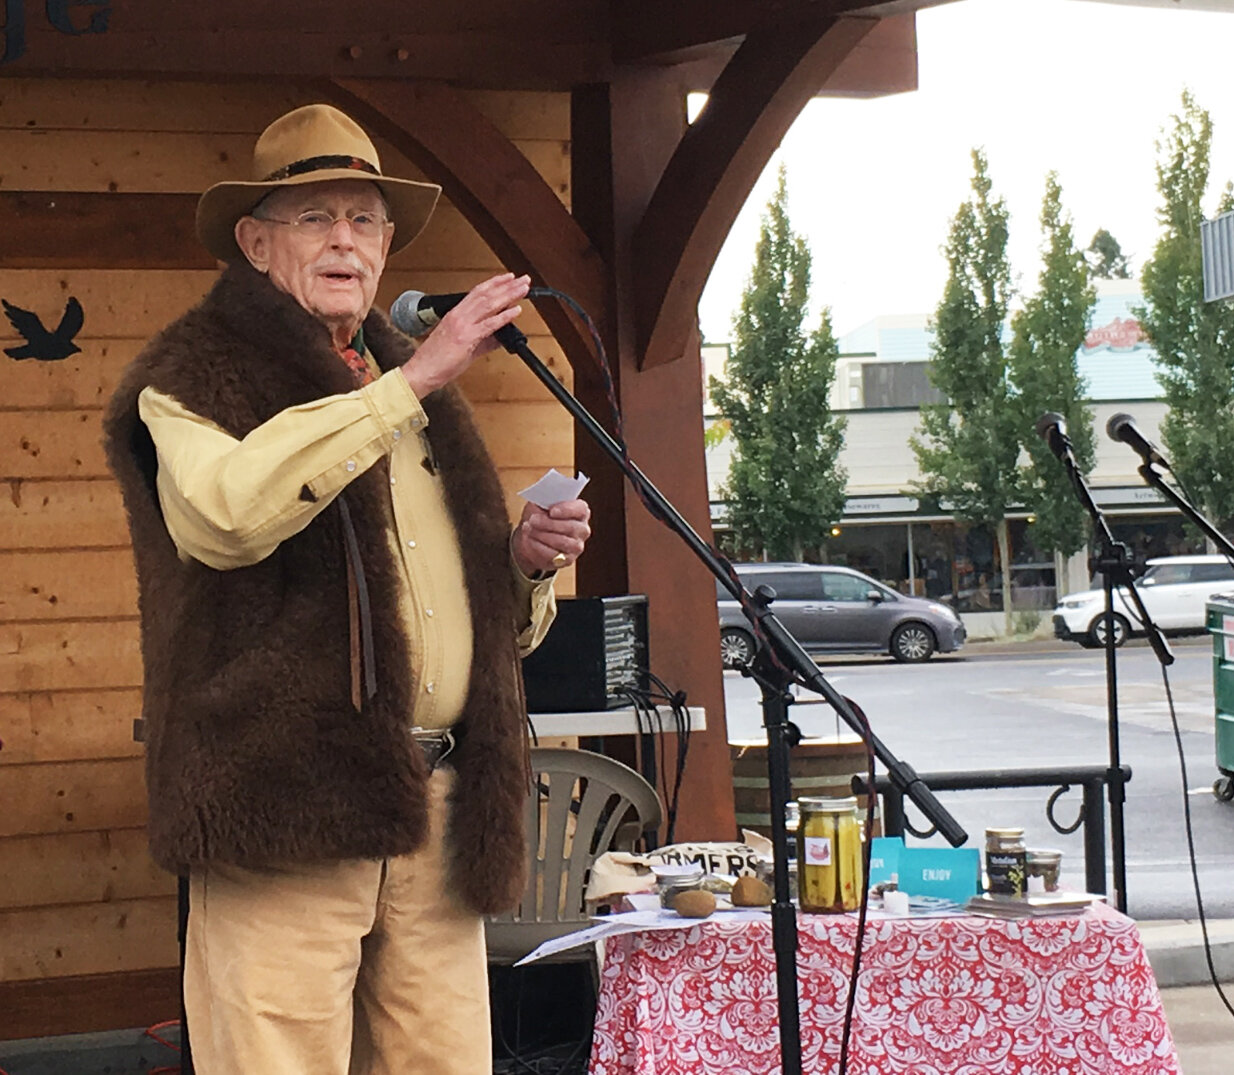  Willard Bartlett III of Camp Sherman shared his haiku with the Tea &amp; Poetry crowd on a drizzly fall day. The winner in the Locals Only category, Bartlett selected a bottle of Metolius Tea Chai as his prize. 